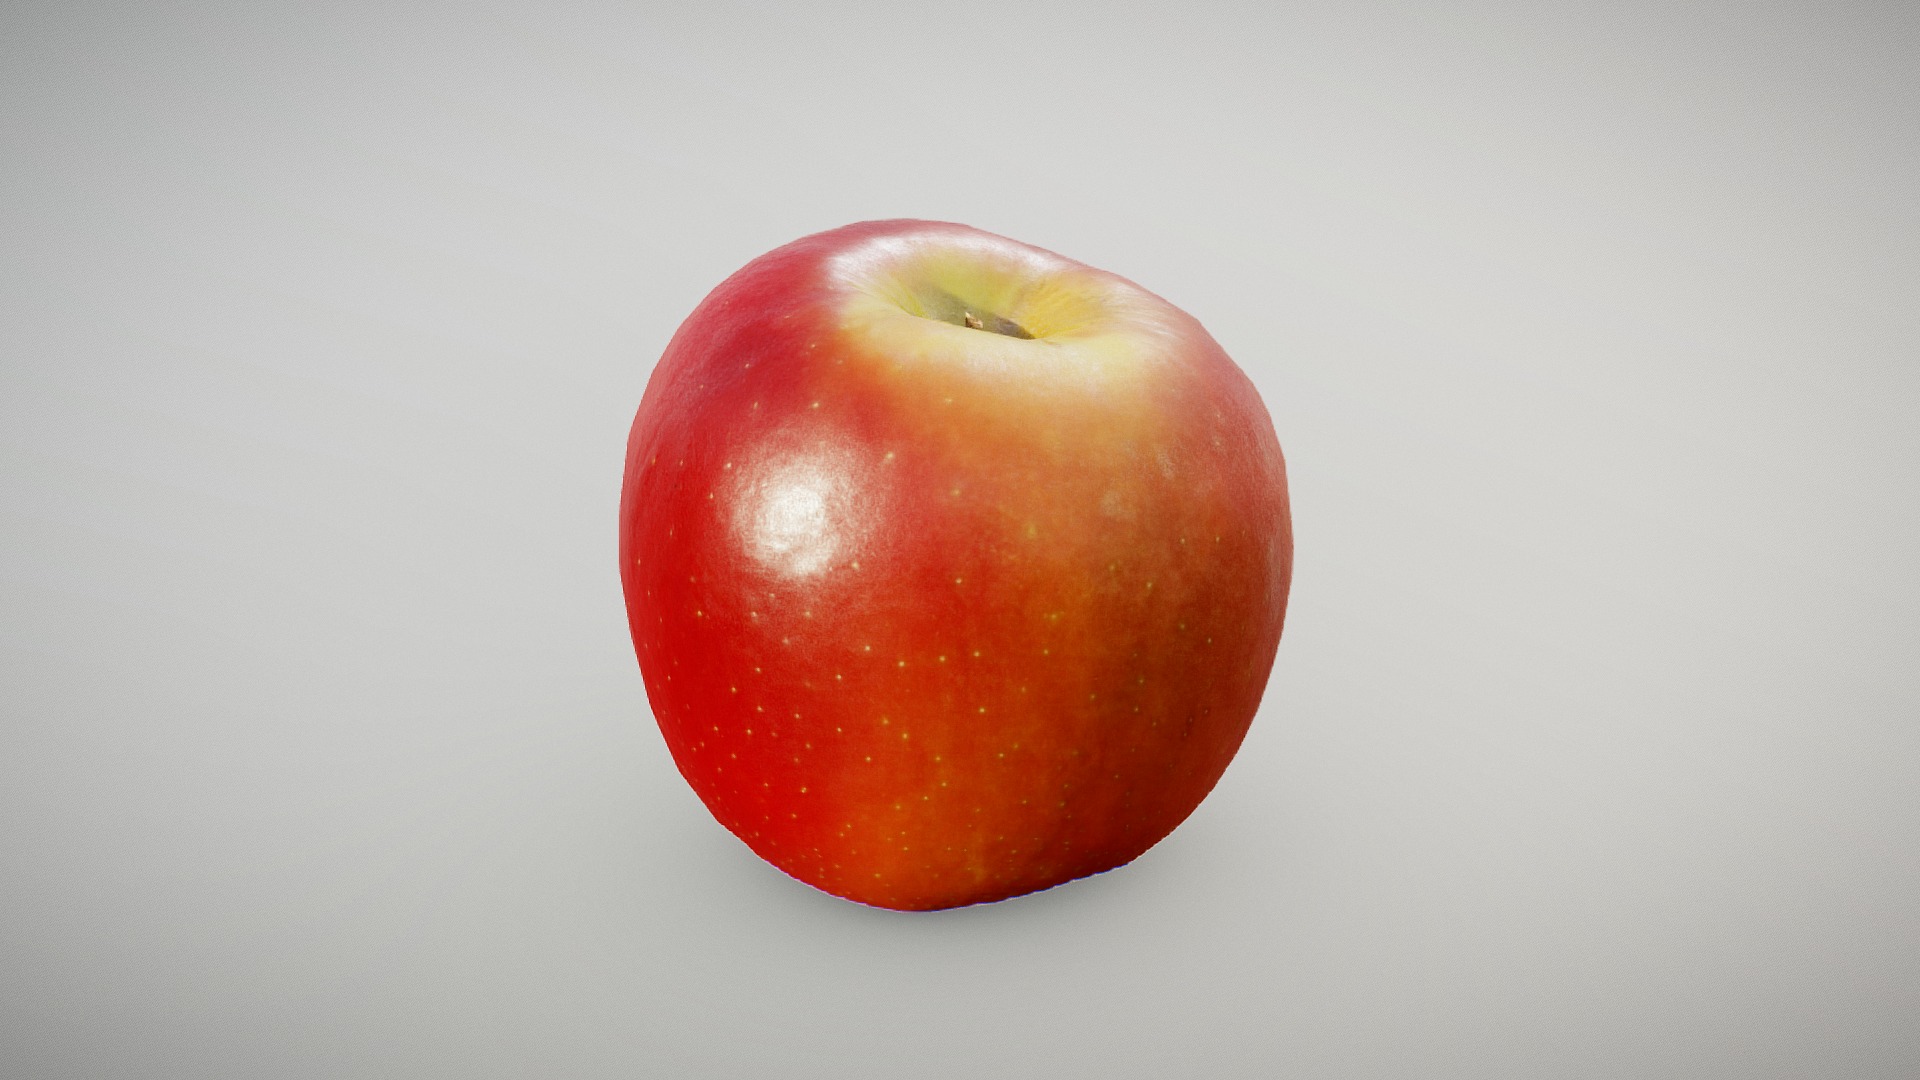 3D model Ambrosia Apple - This is a 3D model of the Ambrosia Apple. The 3D model is about a red apple on a white surface.